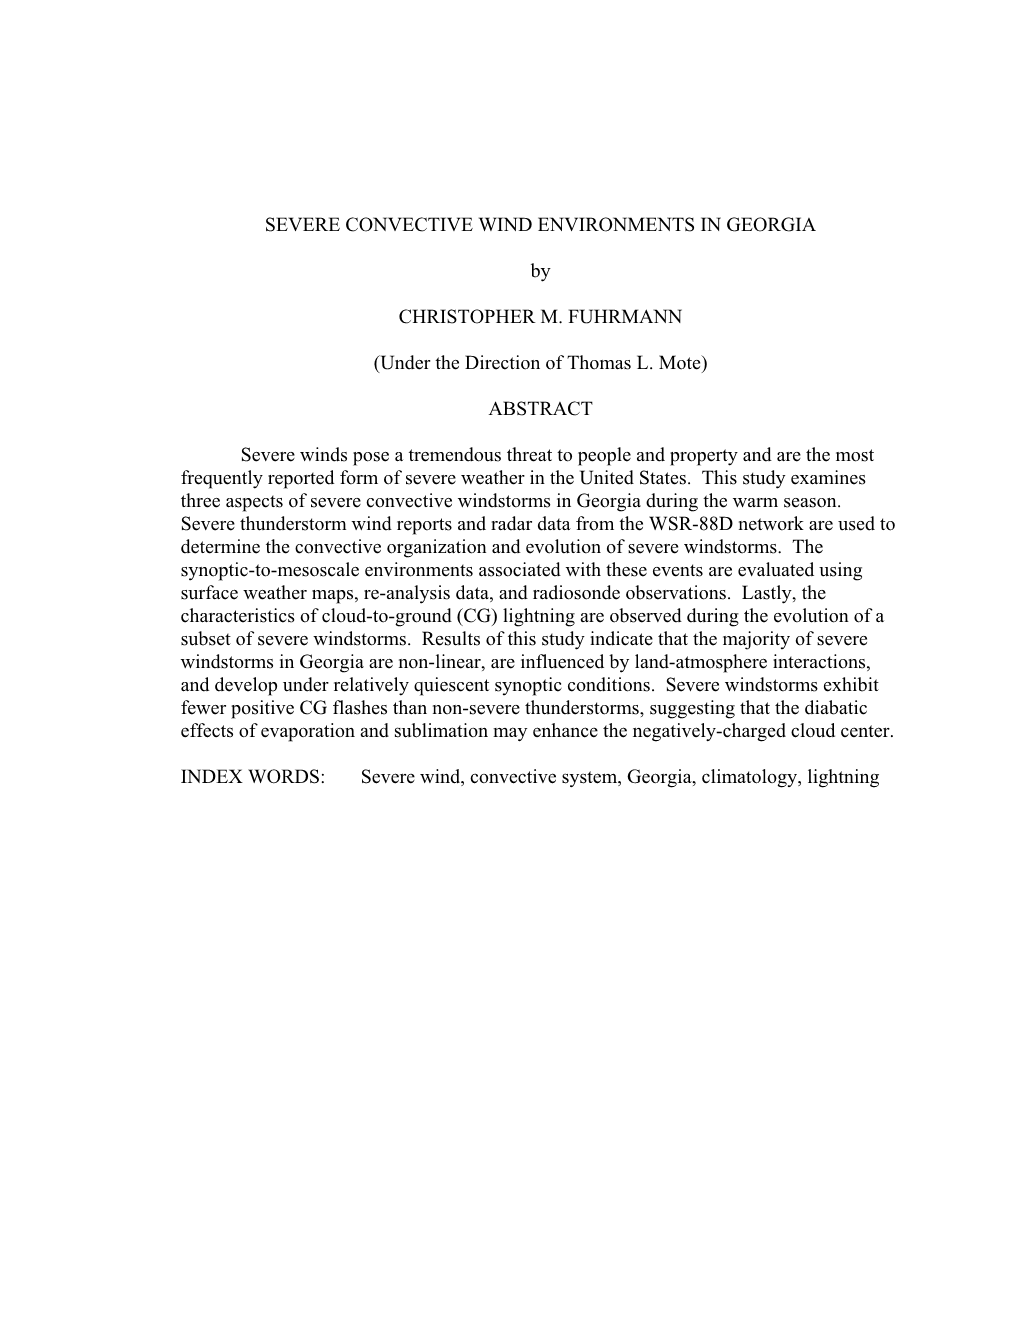 SEVERE CONVECTIVE WIND ENVIRONMENTS in GEORGIA By